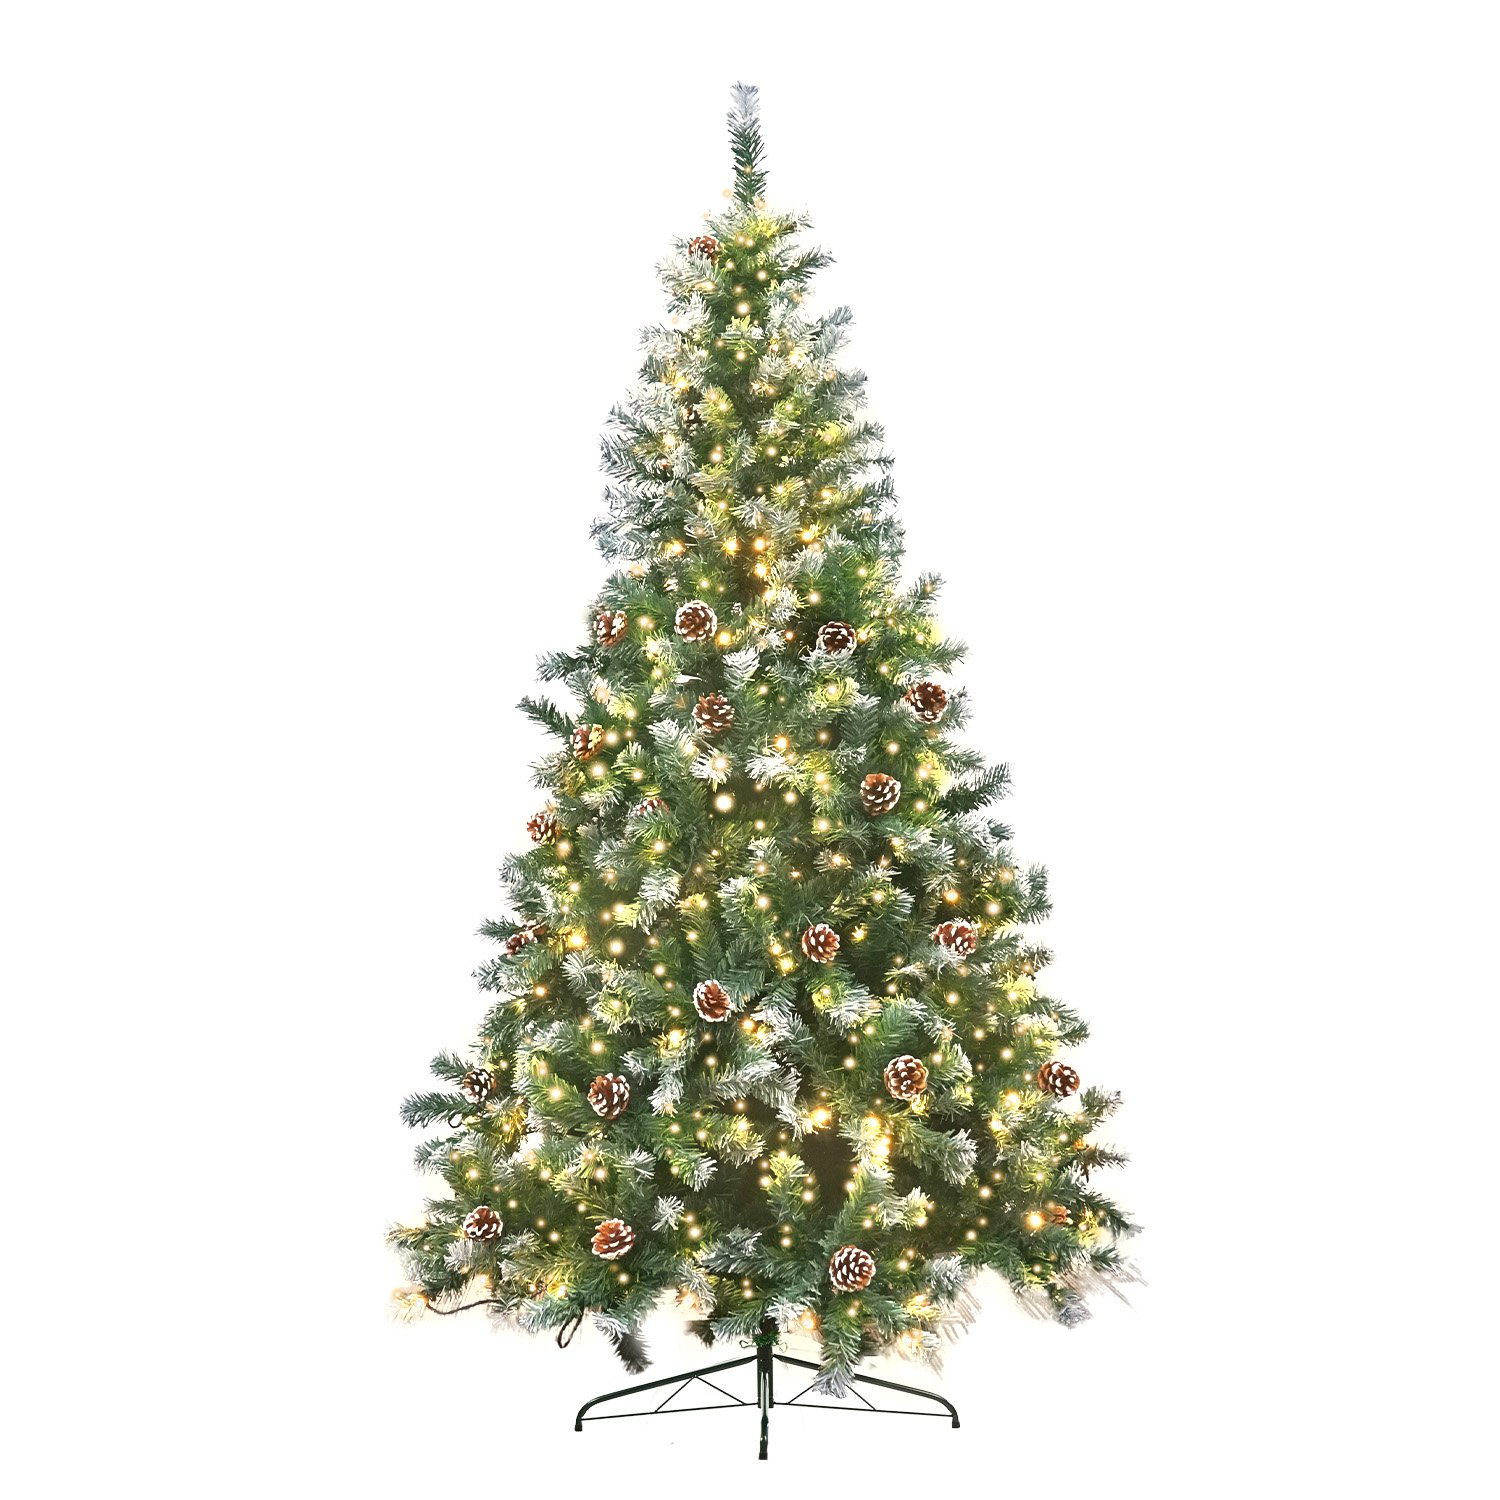 Christabelle 2m Pre Lit LED Christmas Tree with Pine Cones 1